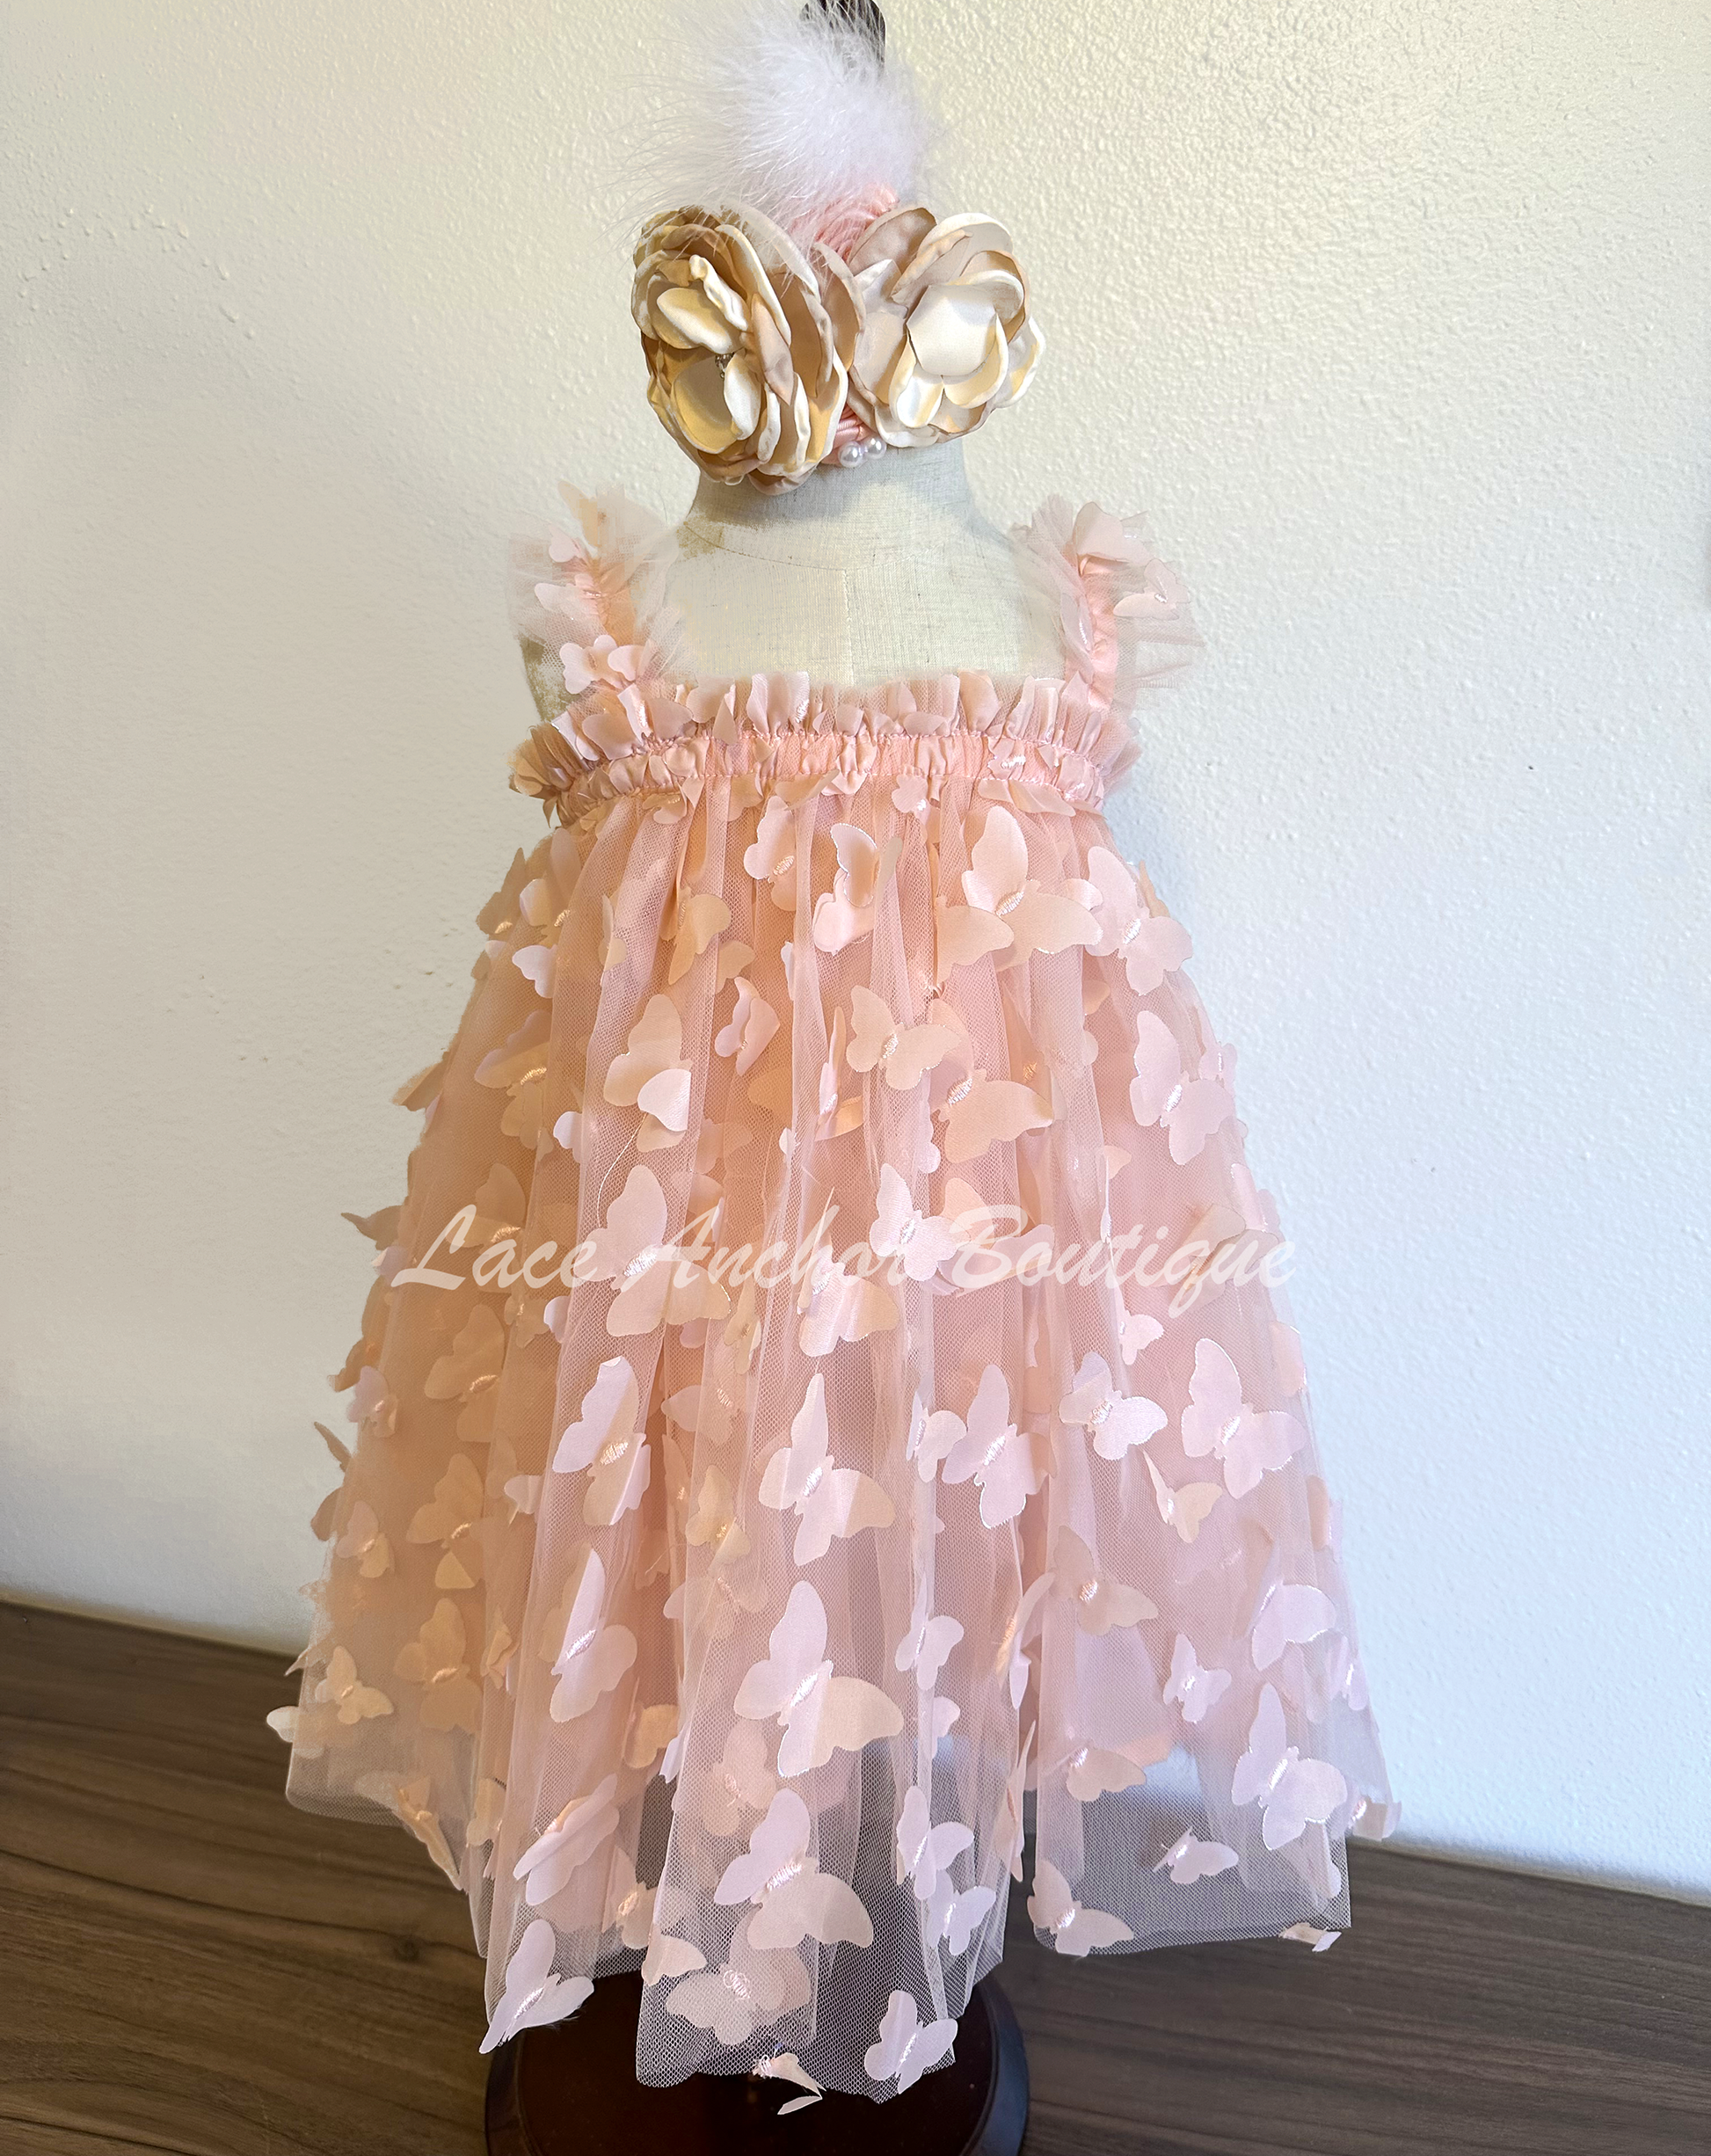 tulle girls dress with ruffled straps and embroidered butterflies all over. Toddler girl tutu dress in blush light pink